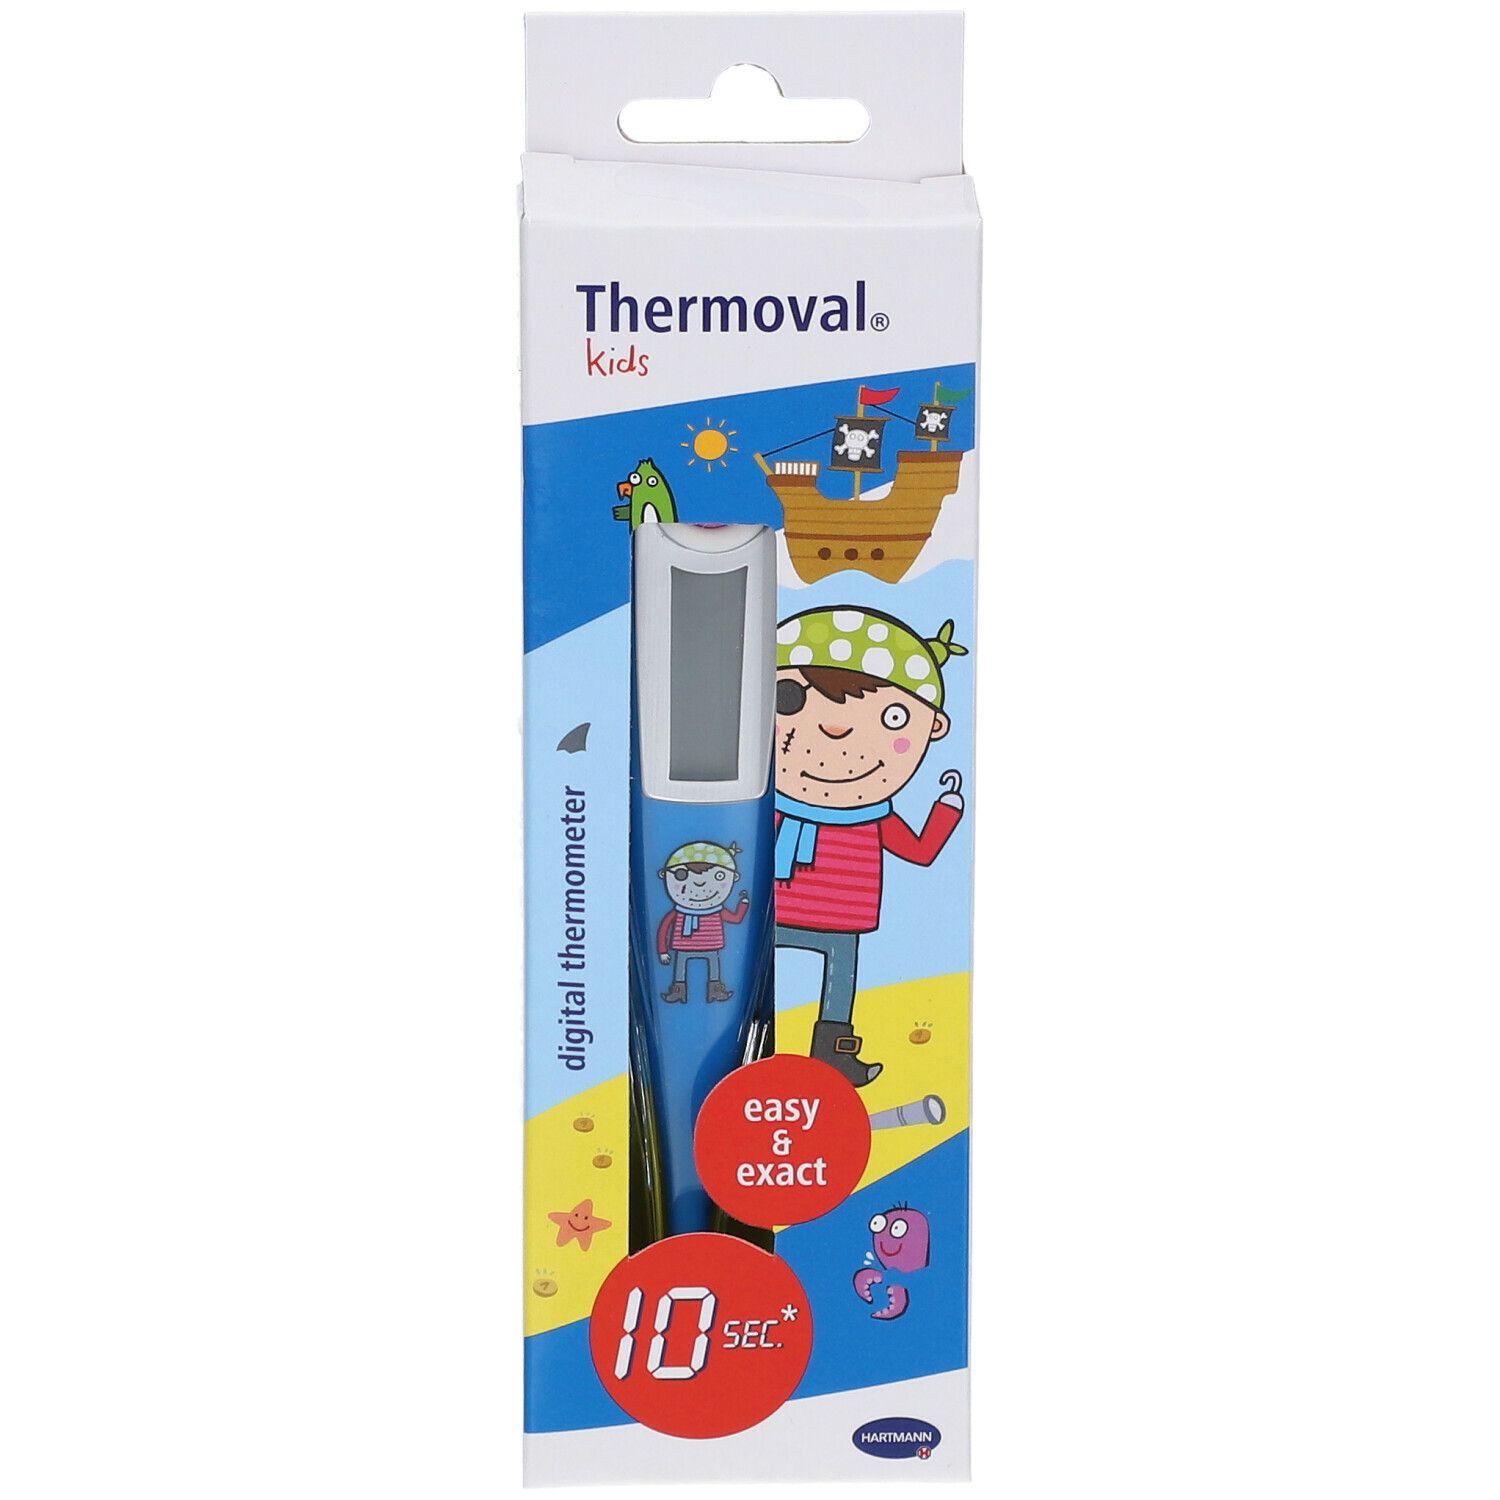 Thermoval® Kids